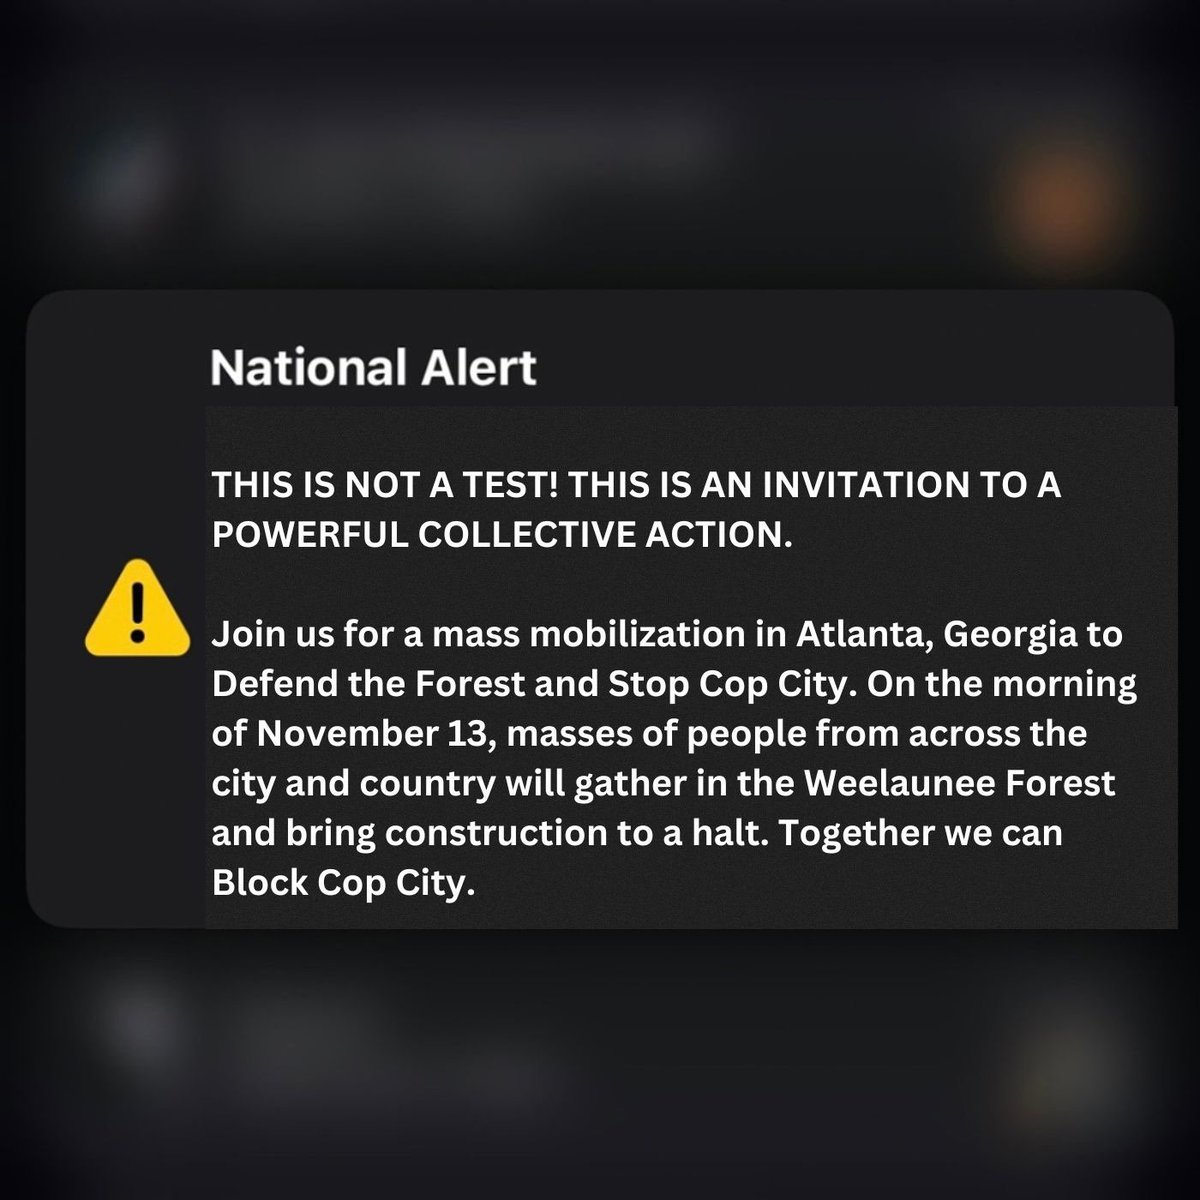 THIS IS NOT A TEST.
GET TO ATLANTA, NOVEMBER 13
#StopCopCity #NationalAlert